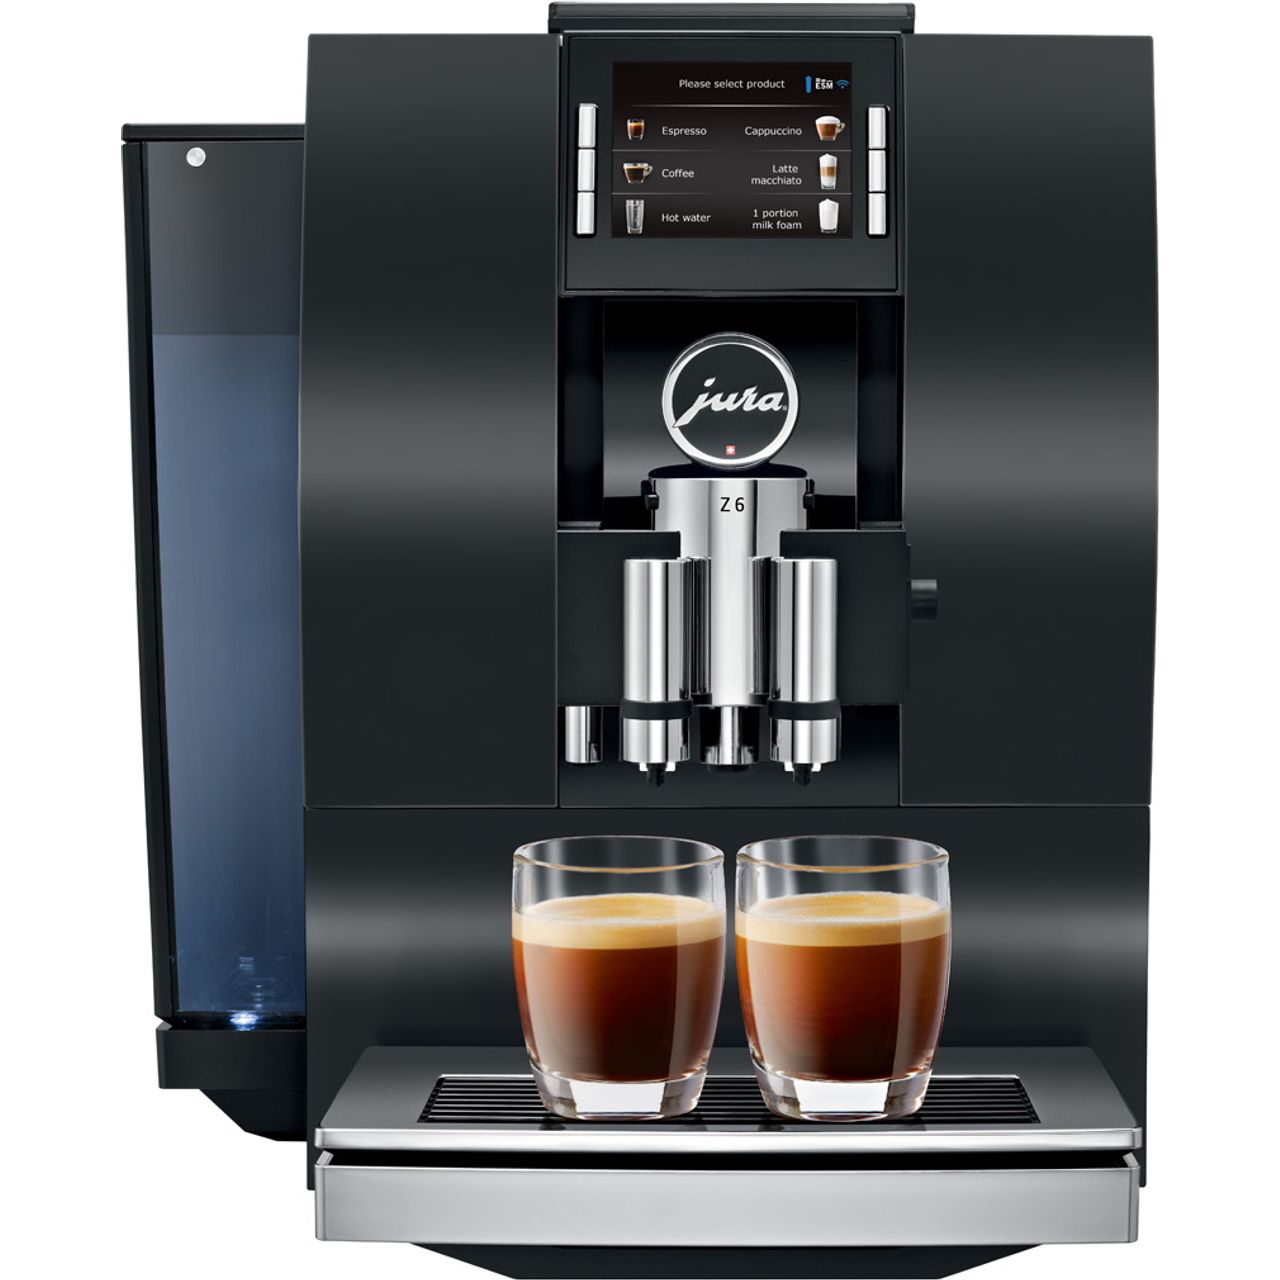 Jura Z6 15263 Bean to Cup Coffee Machine Review